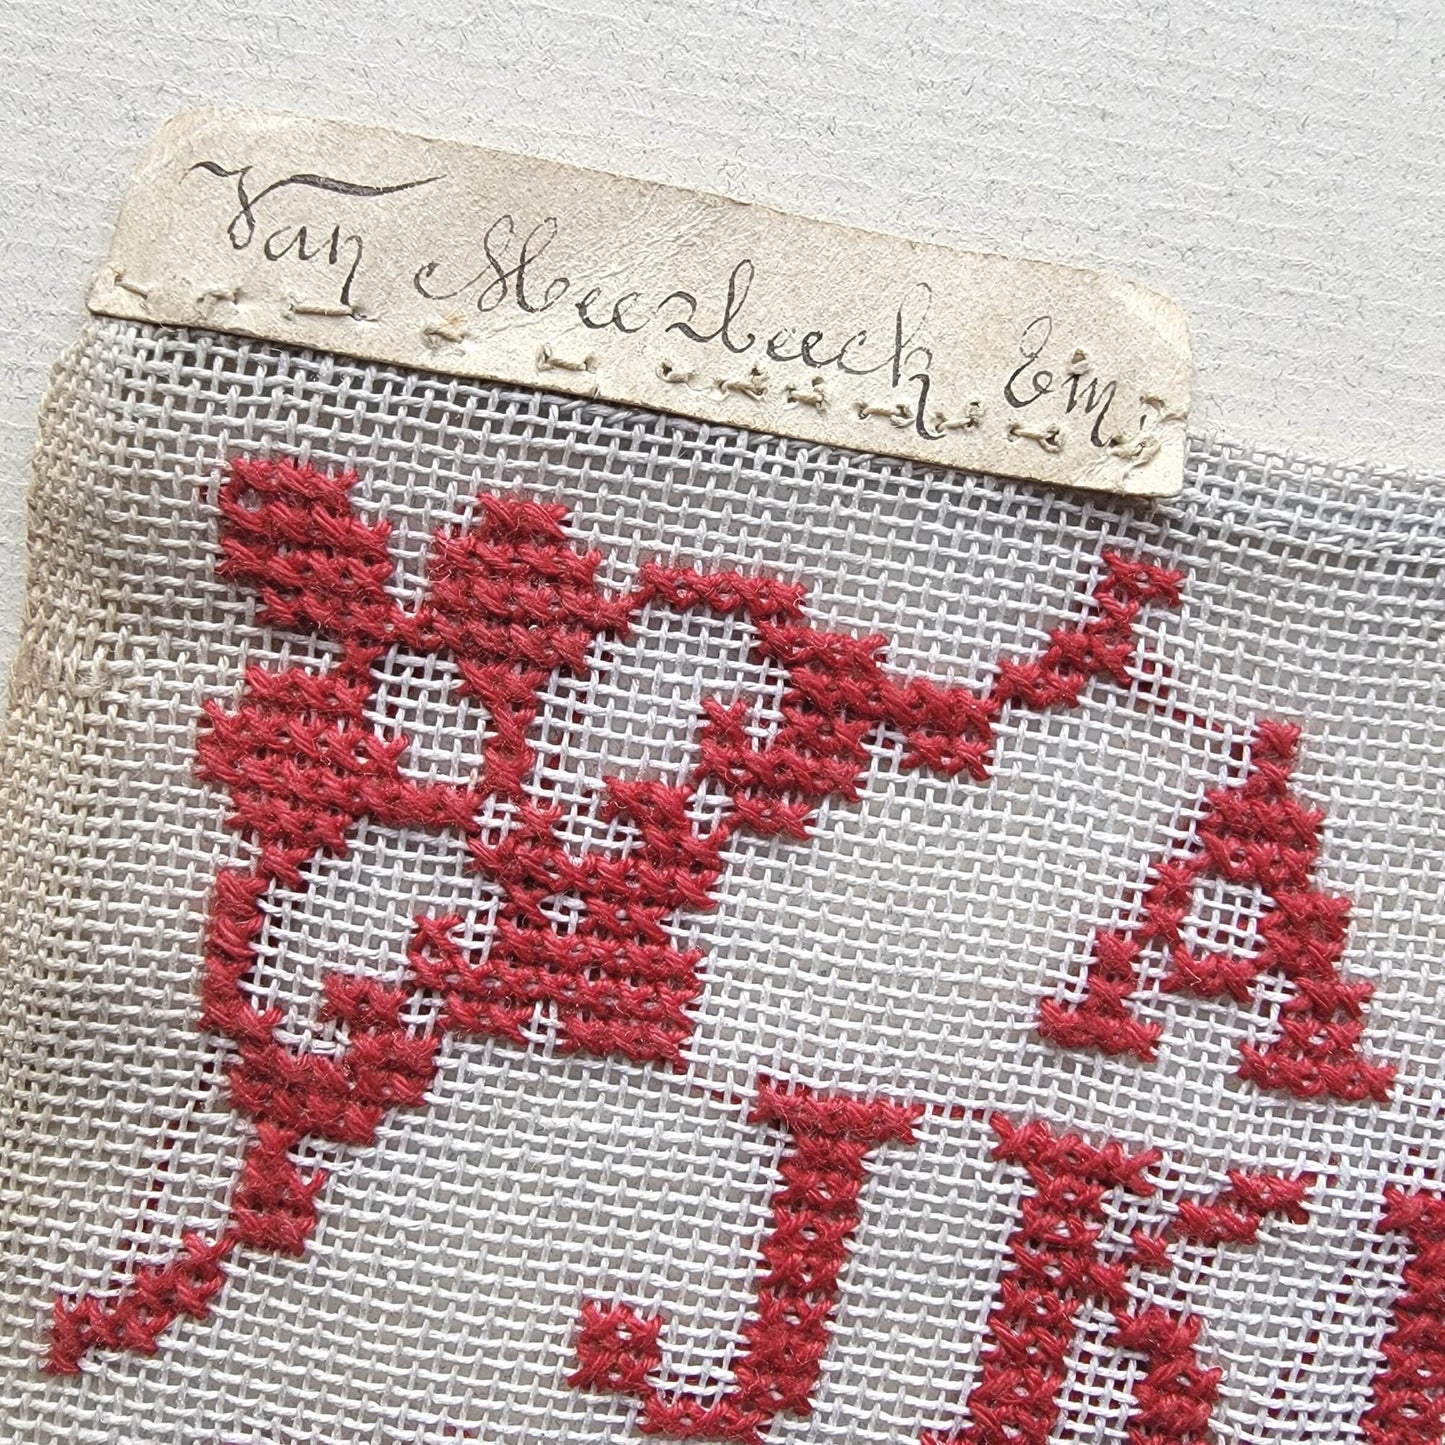 EV Meerbeck Reproduction Sampler by The Wishing Thorn